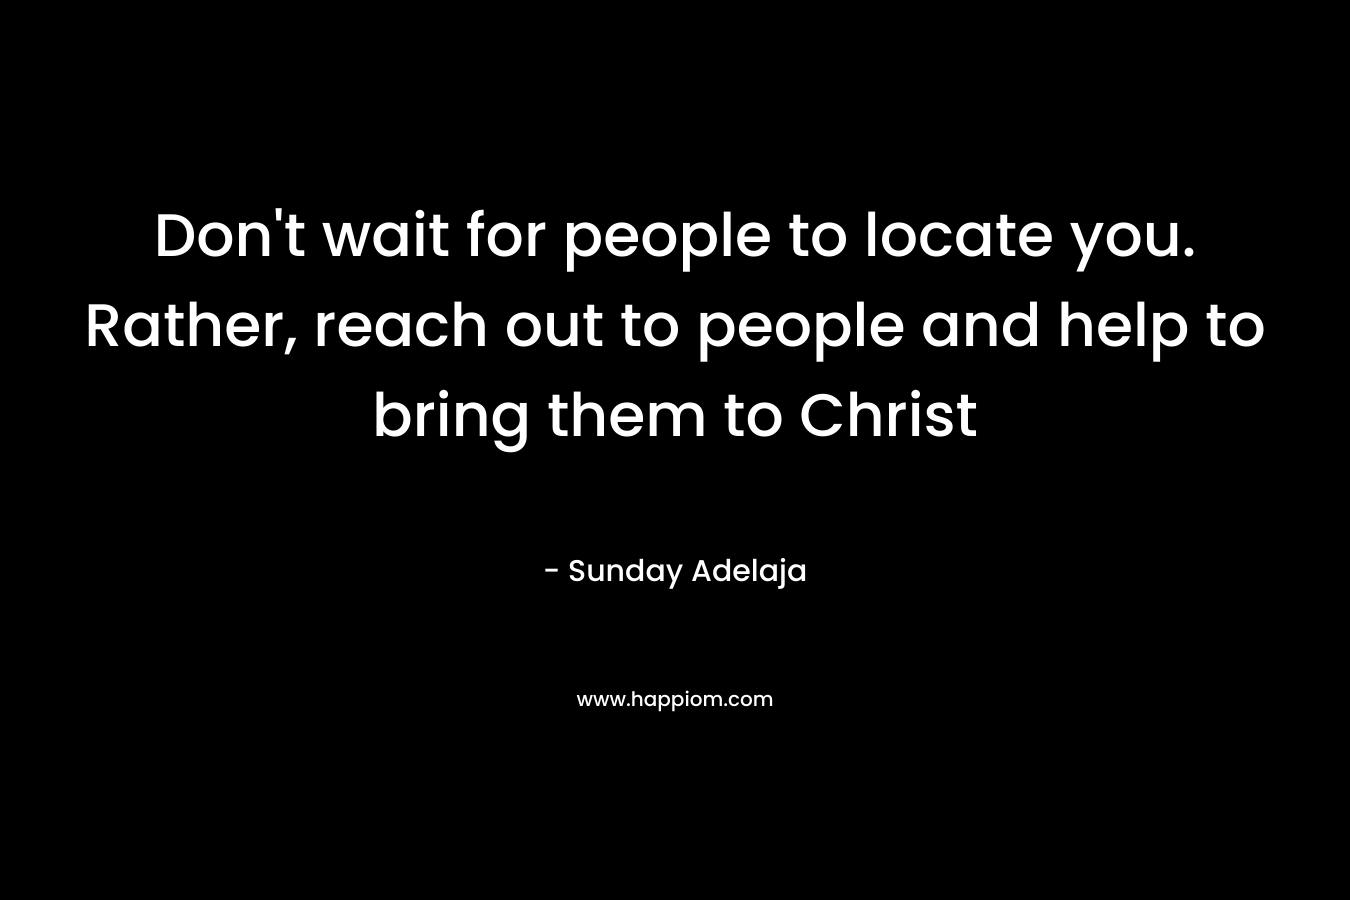 Don't wait for people to locate you. Rather, reach out to people and help to bring them to Christ